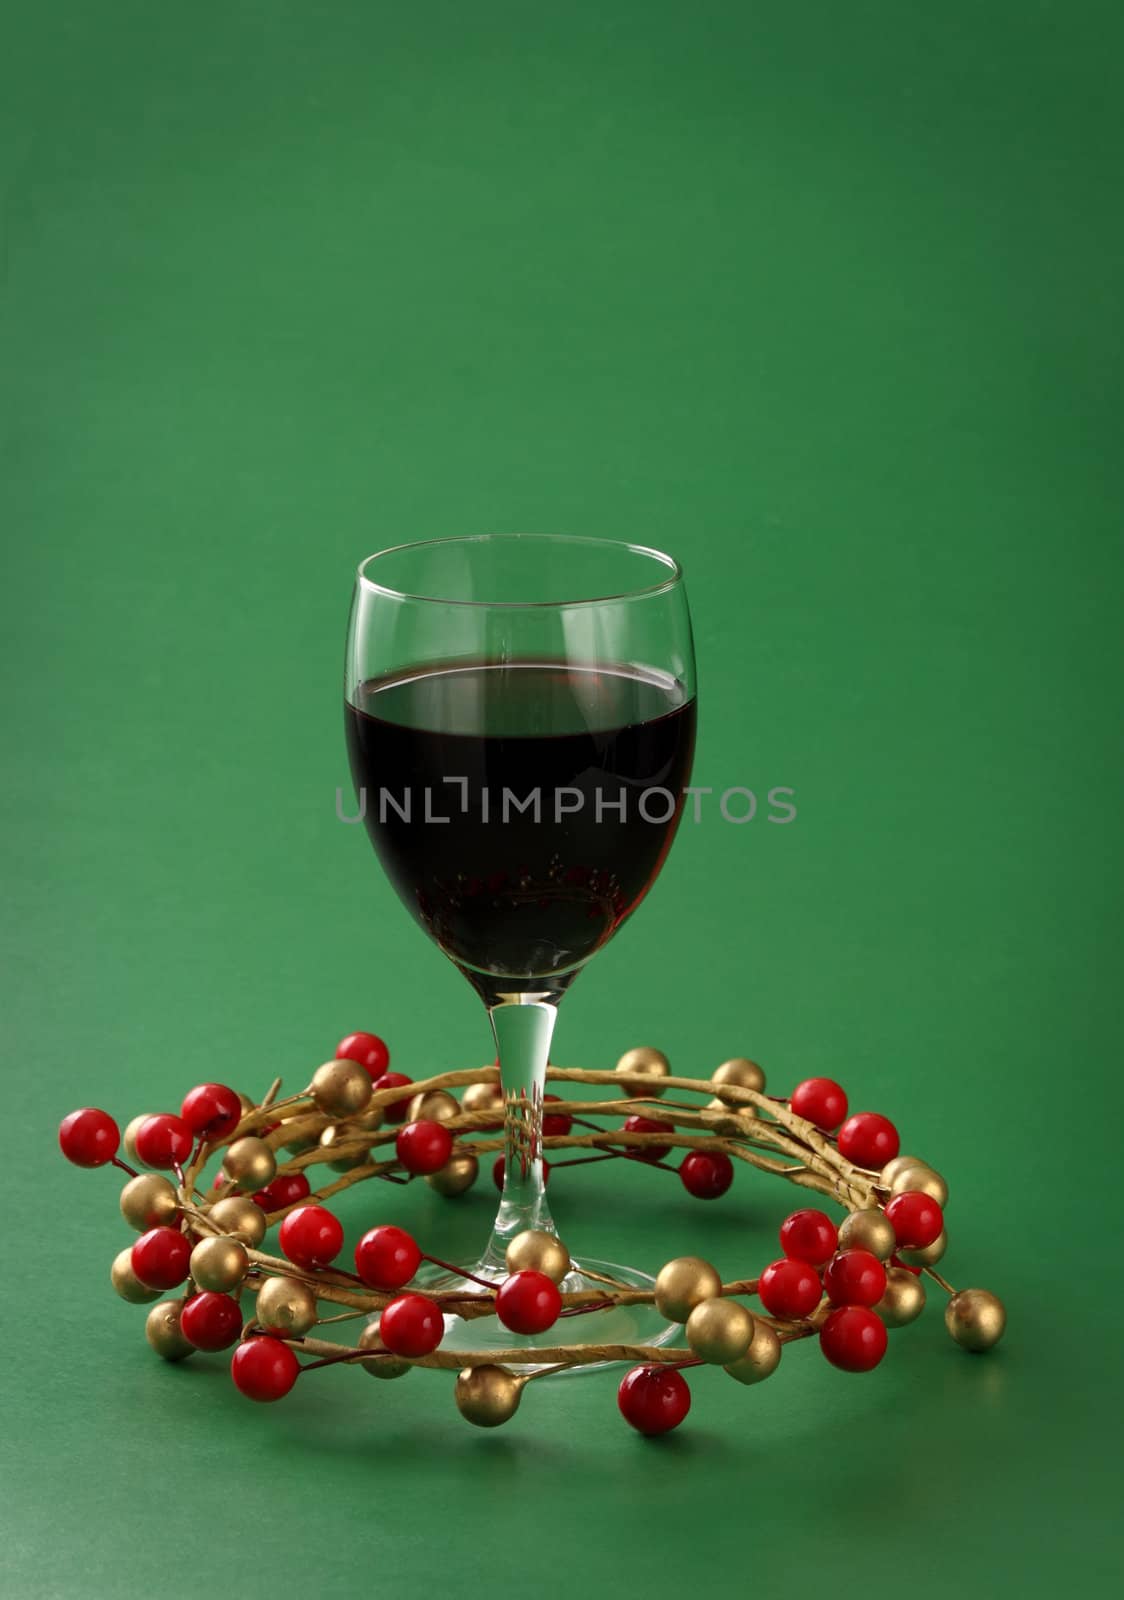 glass of red wine with xmas ornament, green background